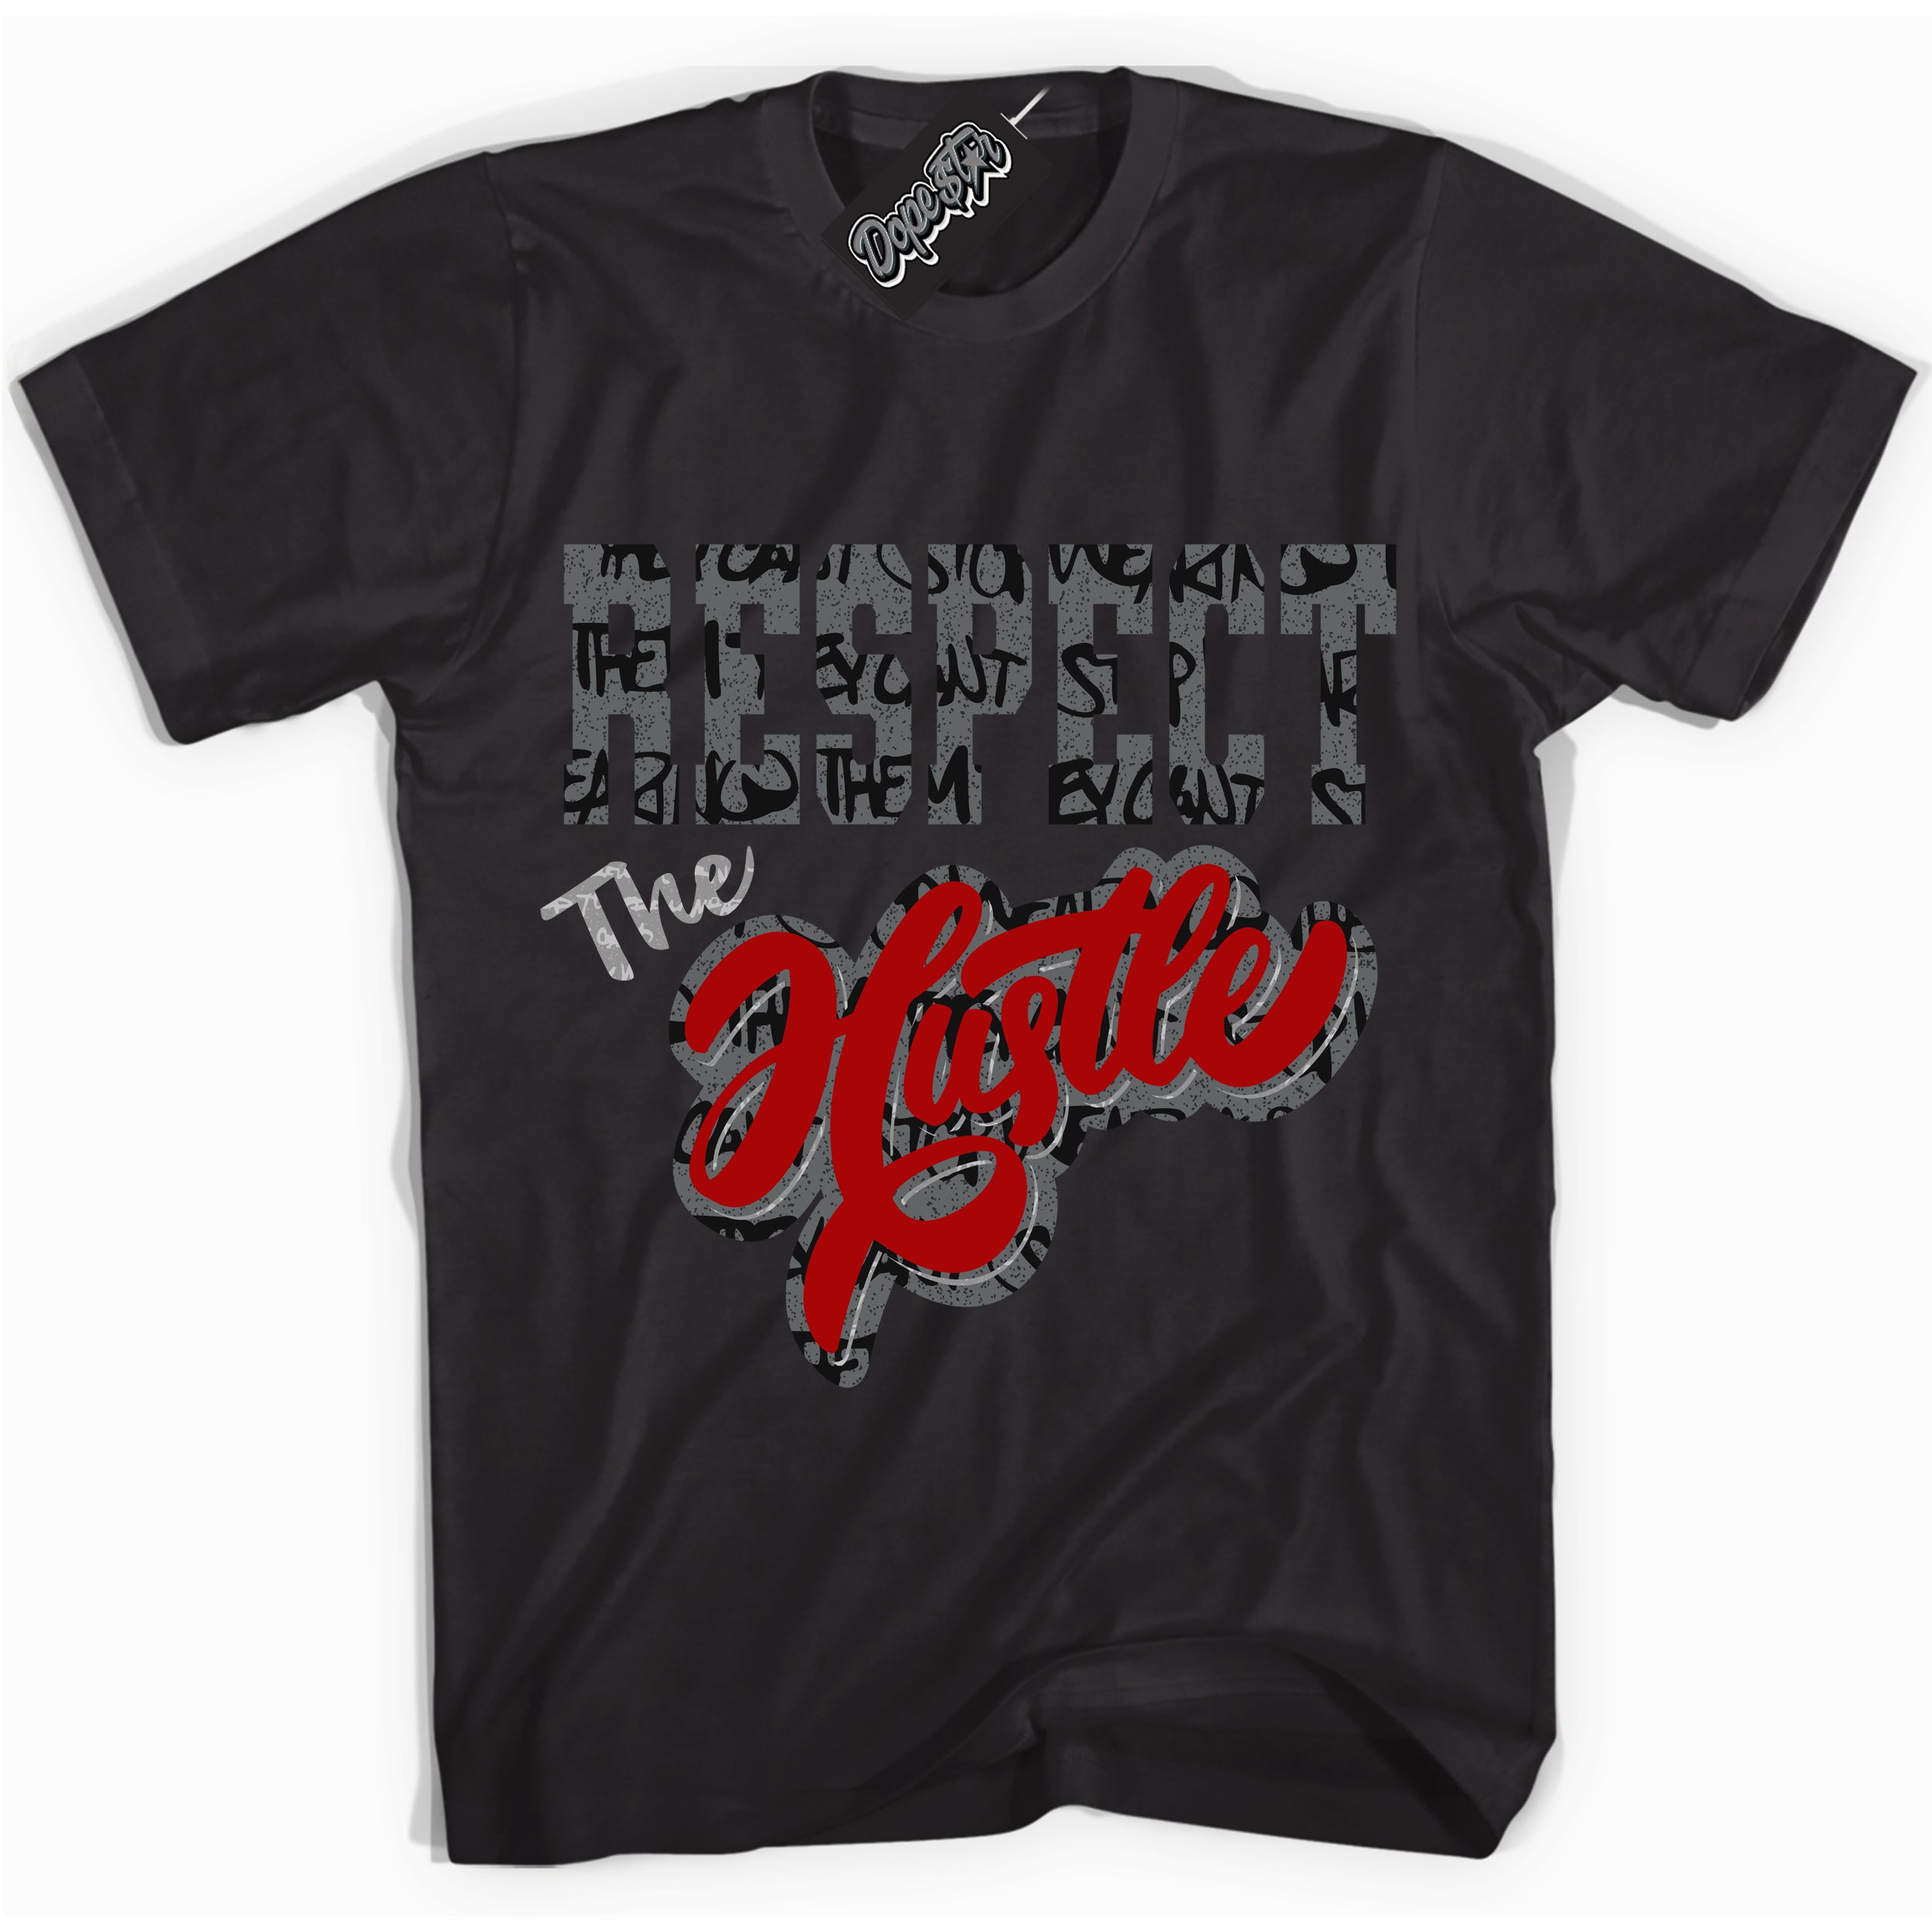 Cool Black Shirt with “ Respect The Hustle ” design that perfectly matches Rebellionaire 1s Sneakers.